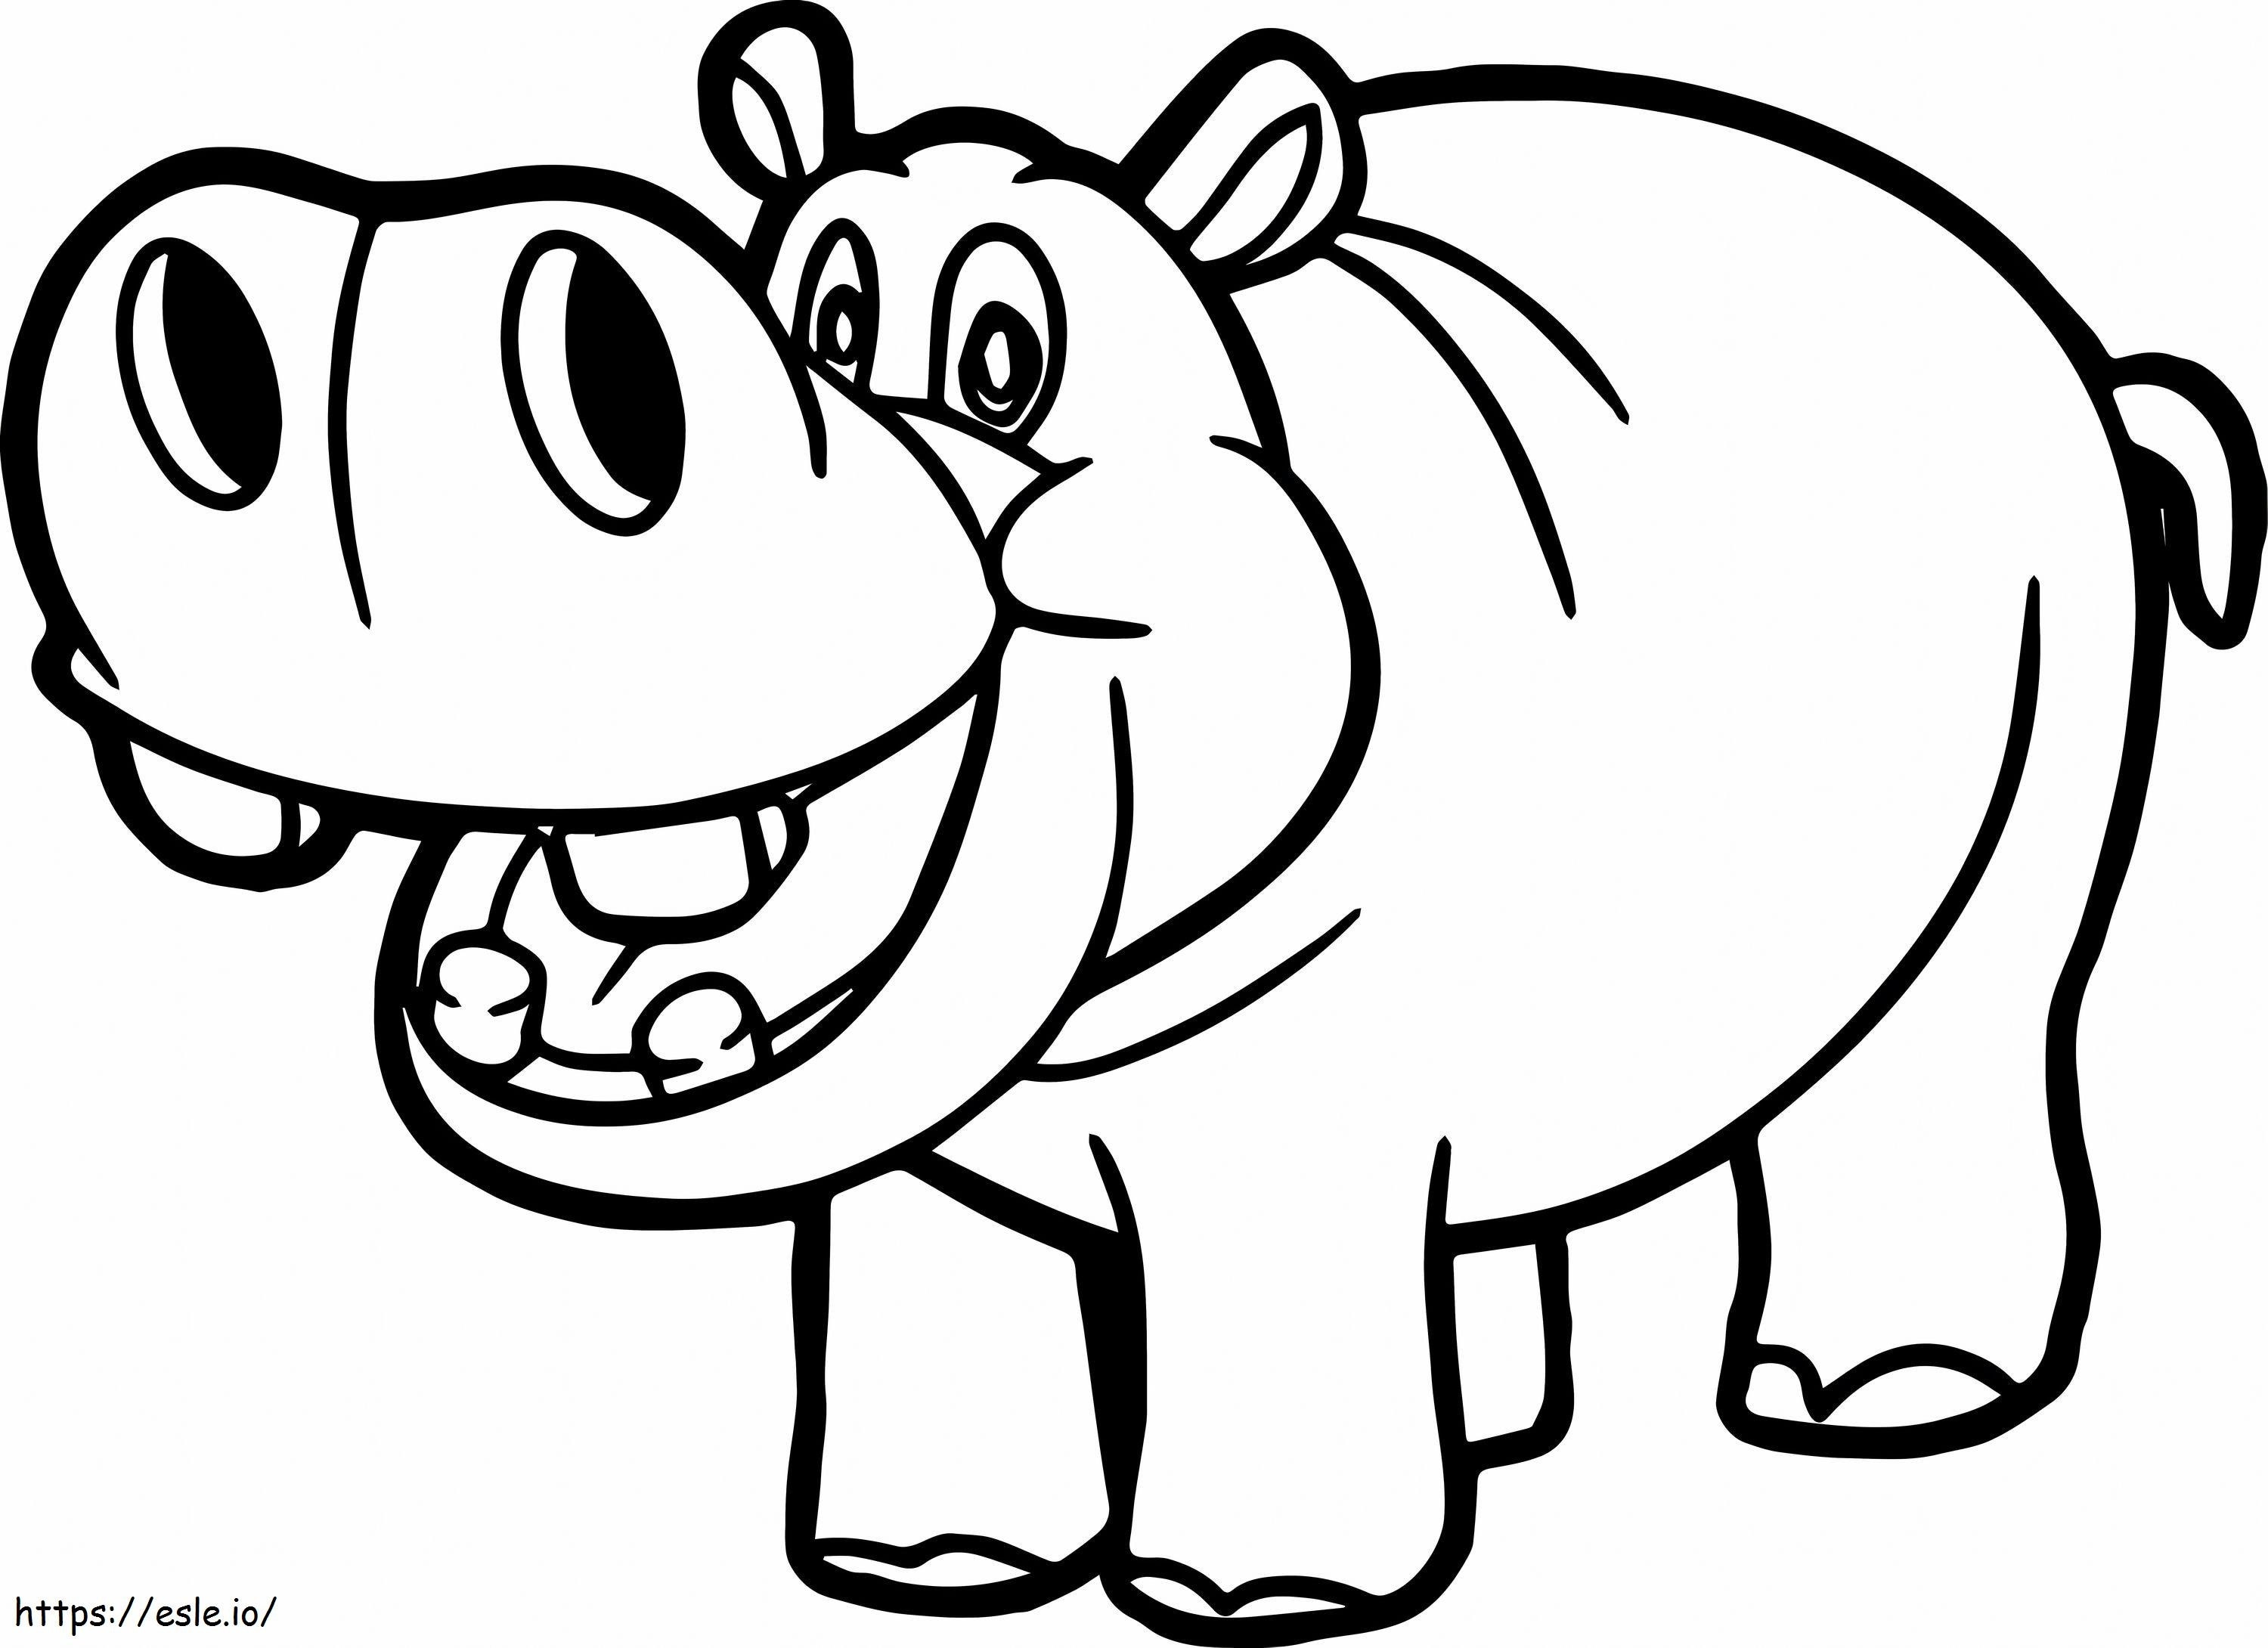 1548128583 Hippopotamuses Luxury Hippo Outline Drawing At Getdrawings Of Hippopotamuses coloring page